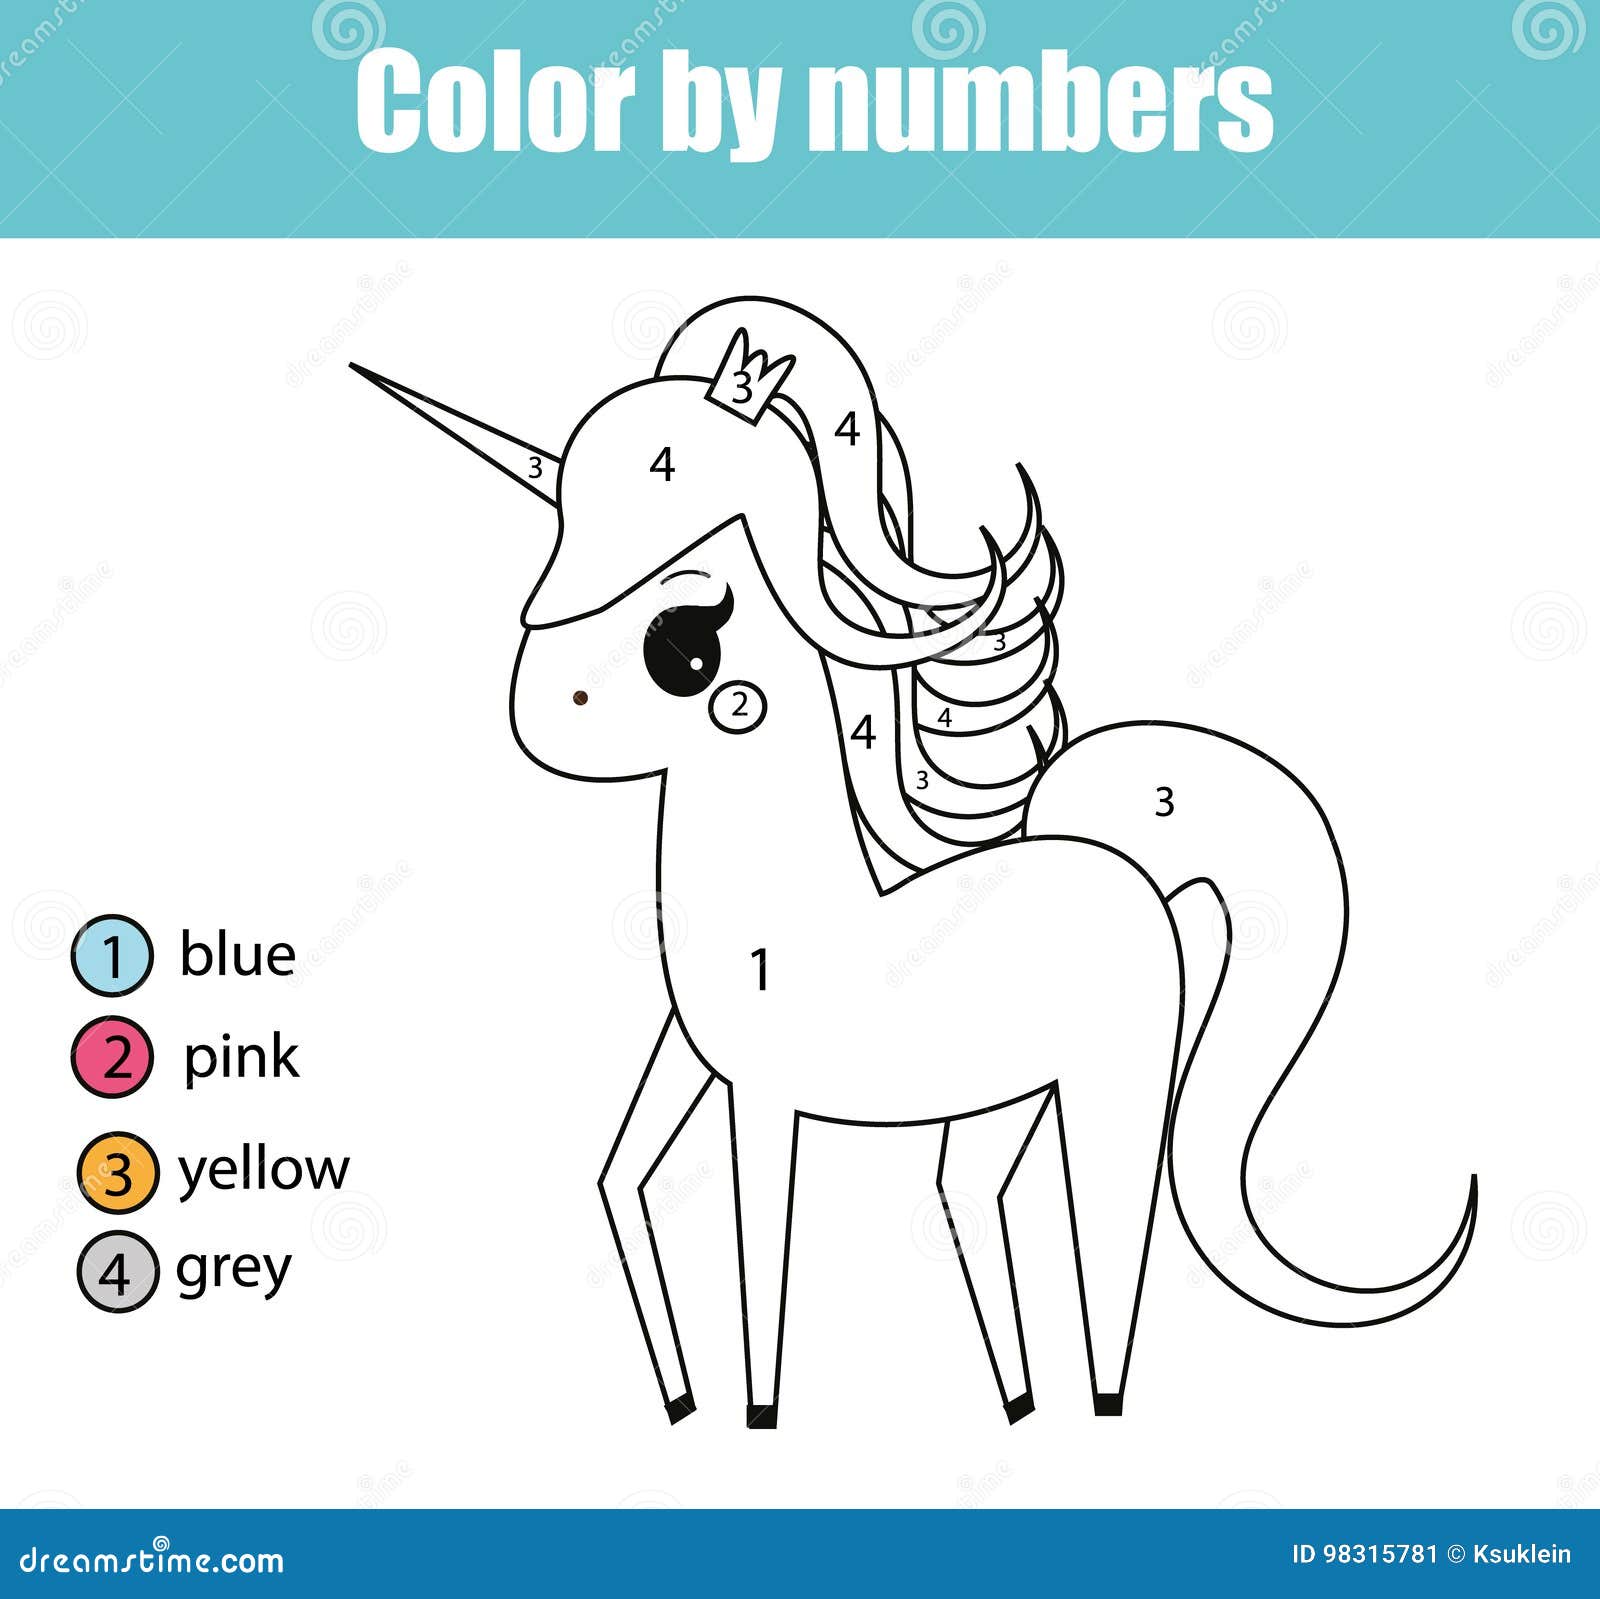 Coloring Page with Unicorn Character. Color by Numbers Educational ...